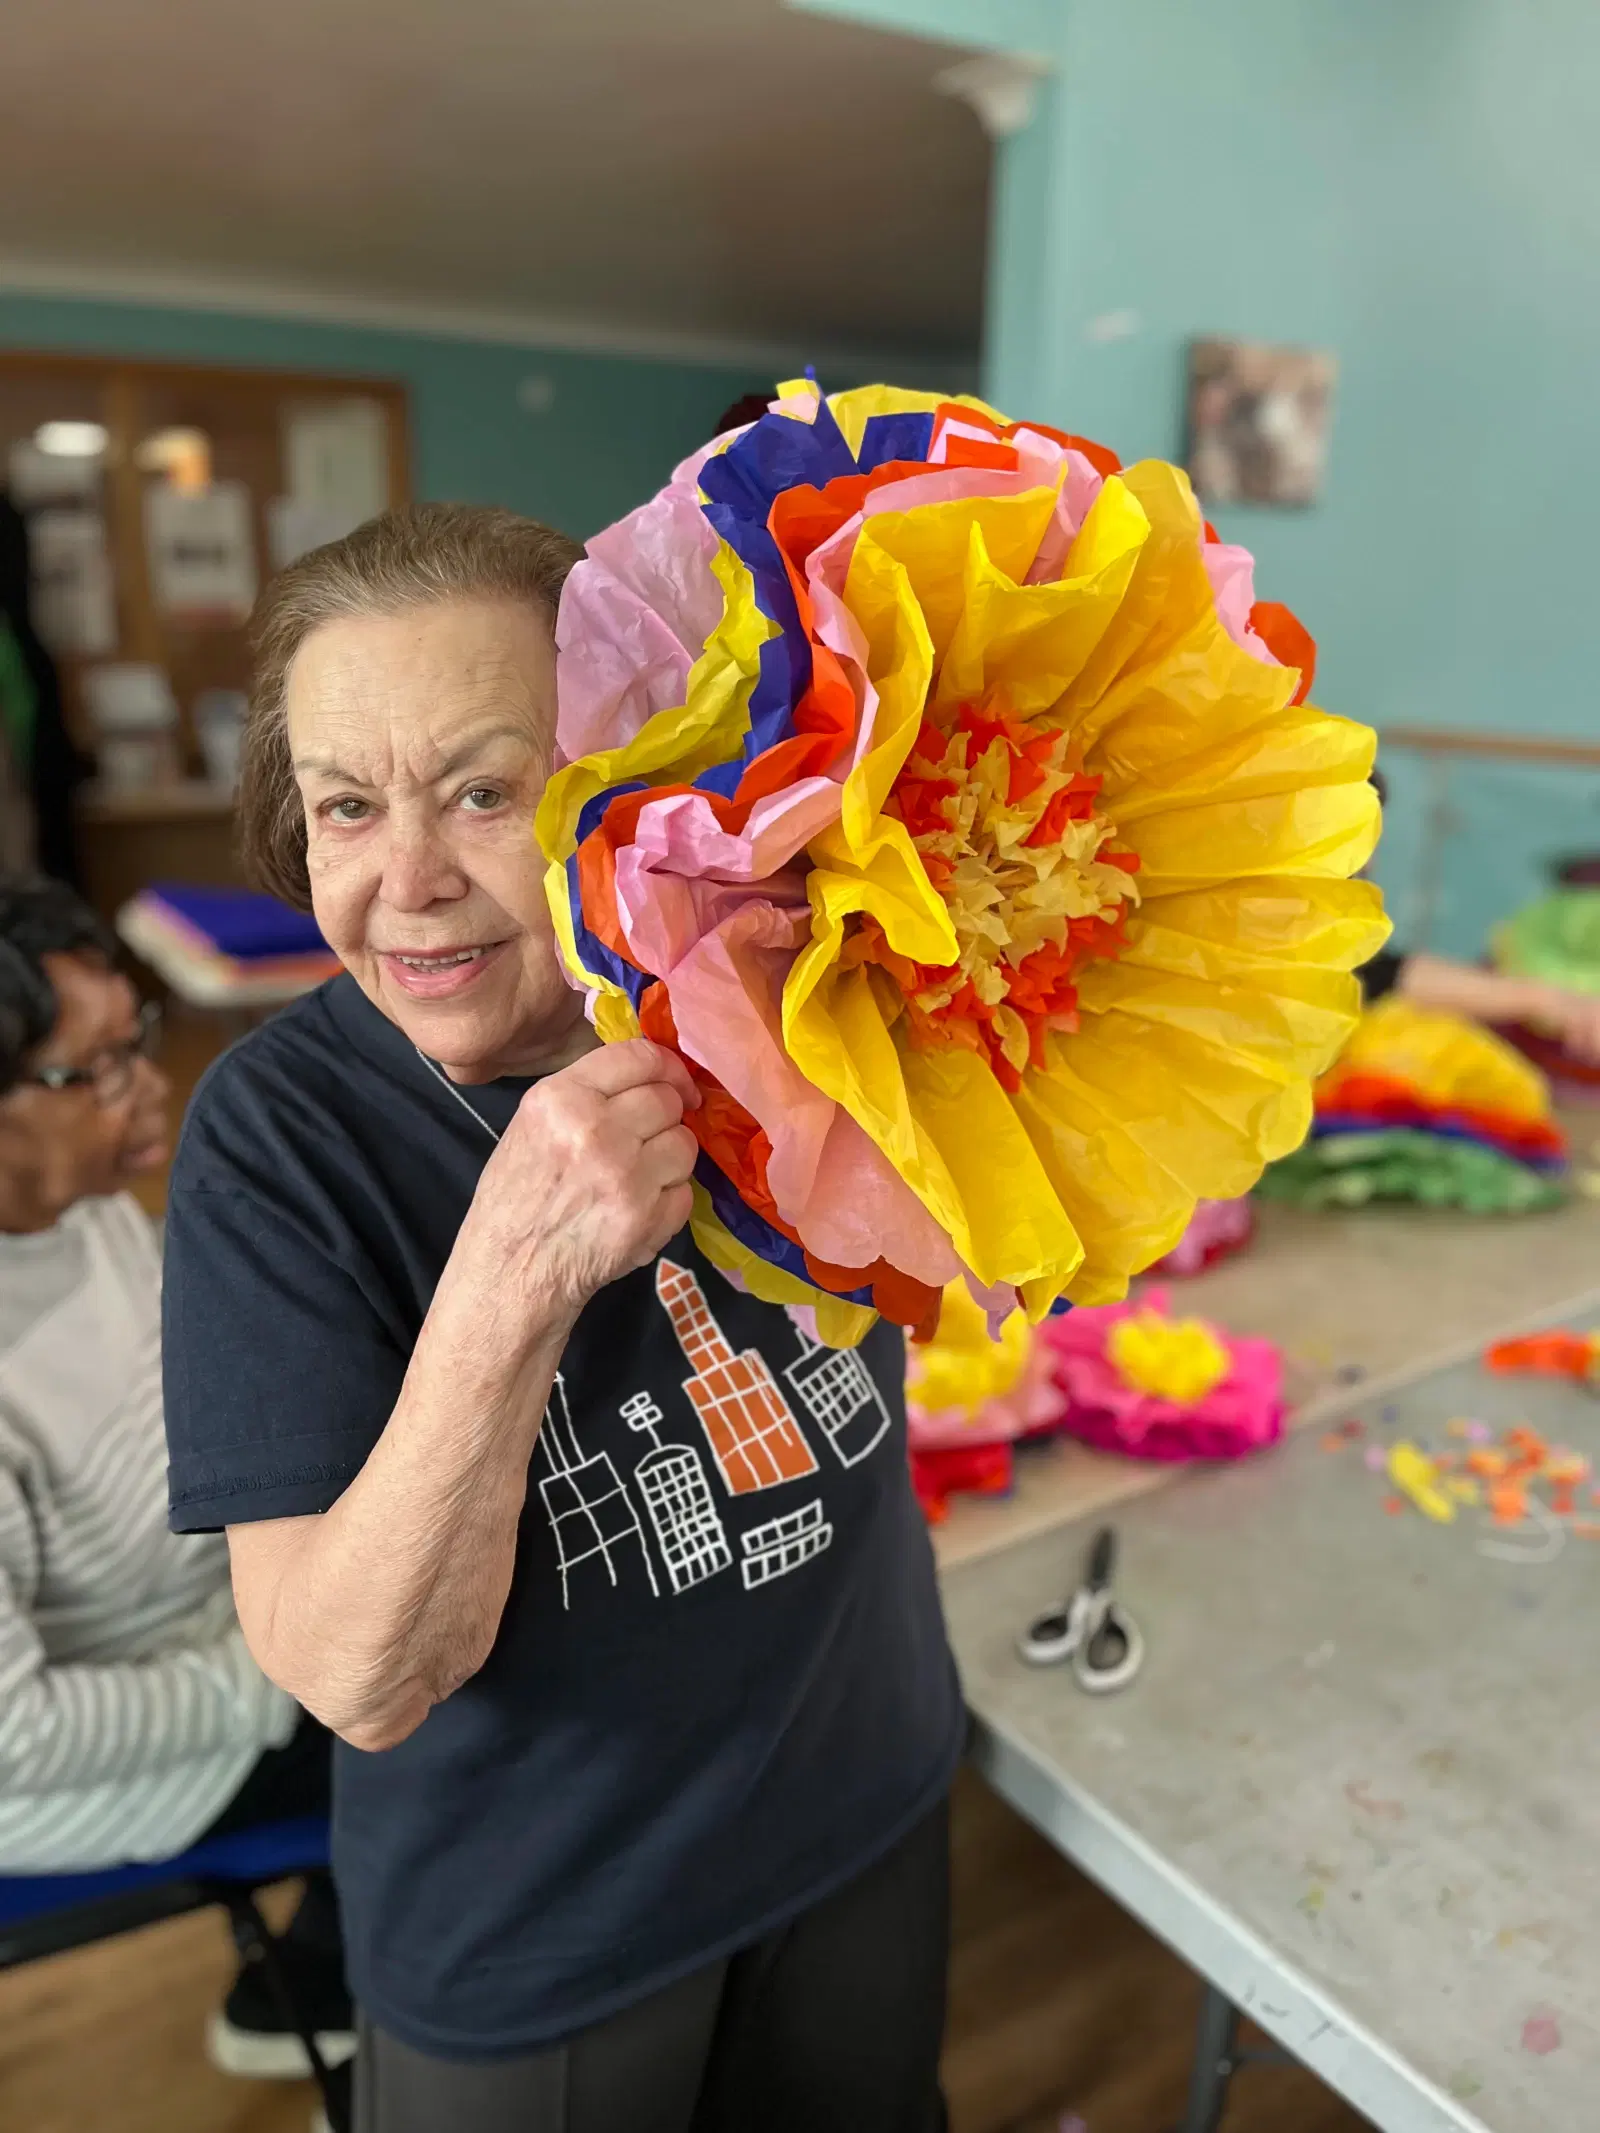 A woman proudly displaying a large, colorful paper flower she has crafted, with a background of a craft-making session in progress.